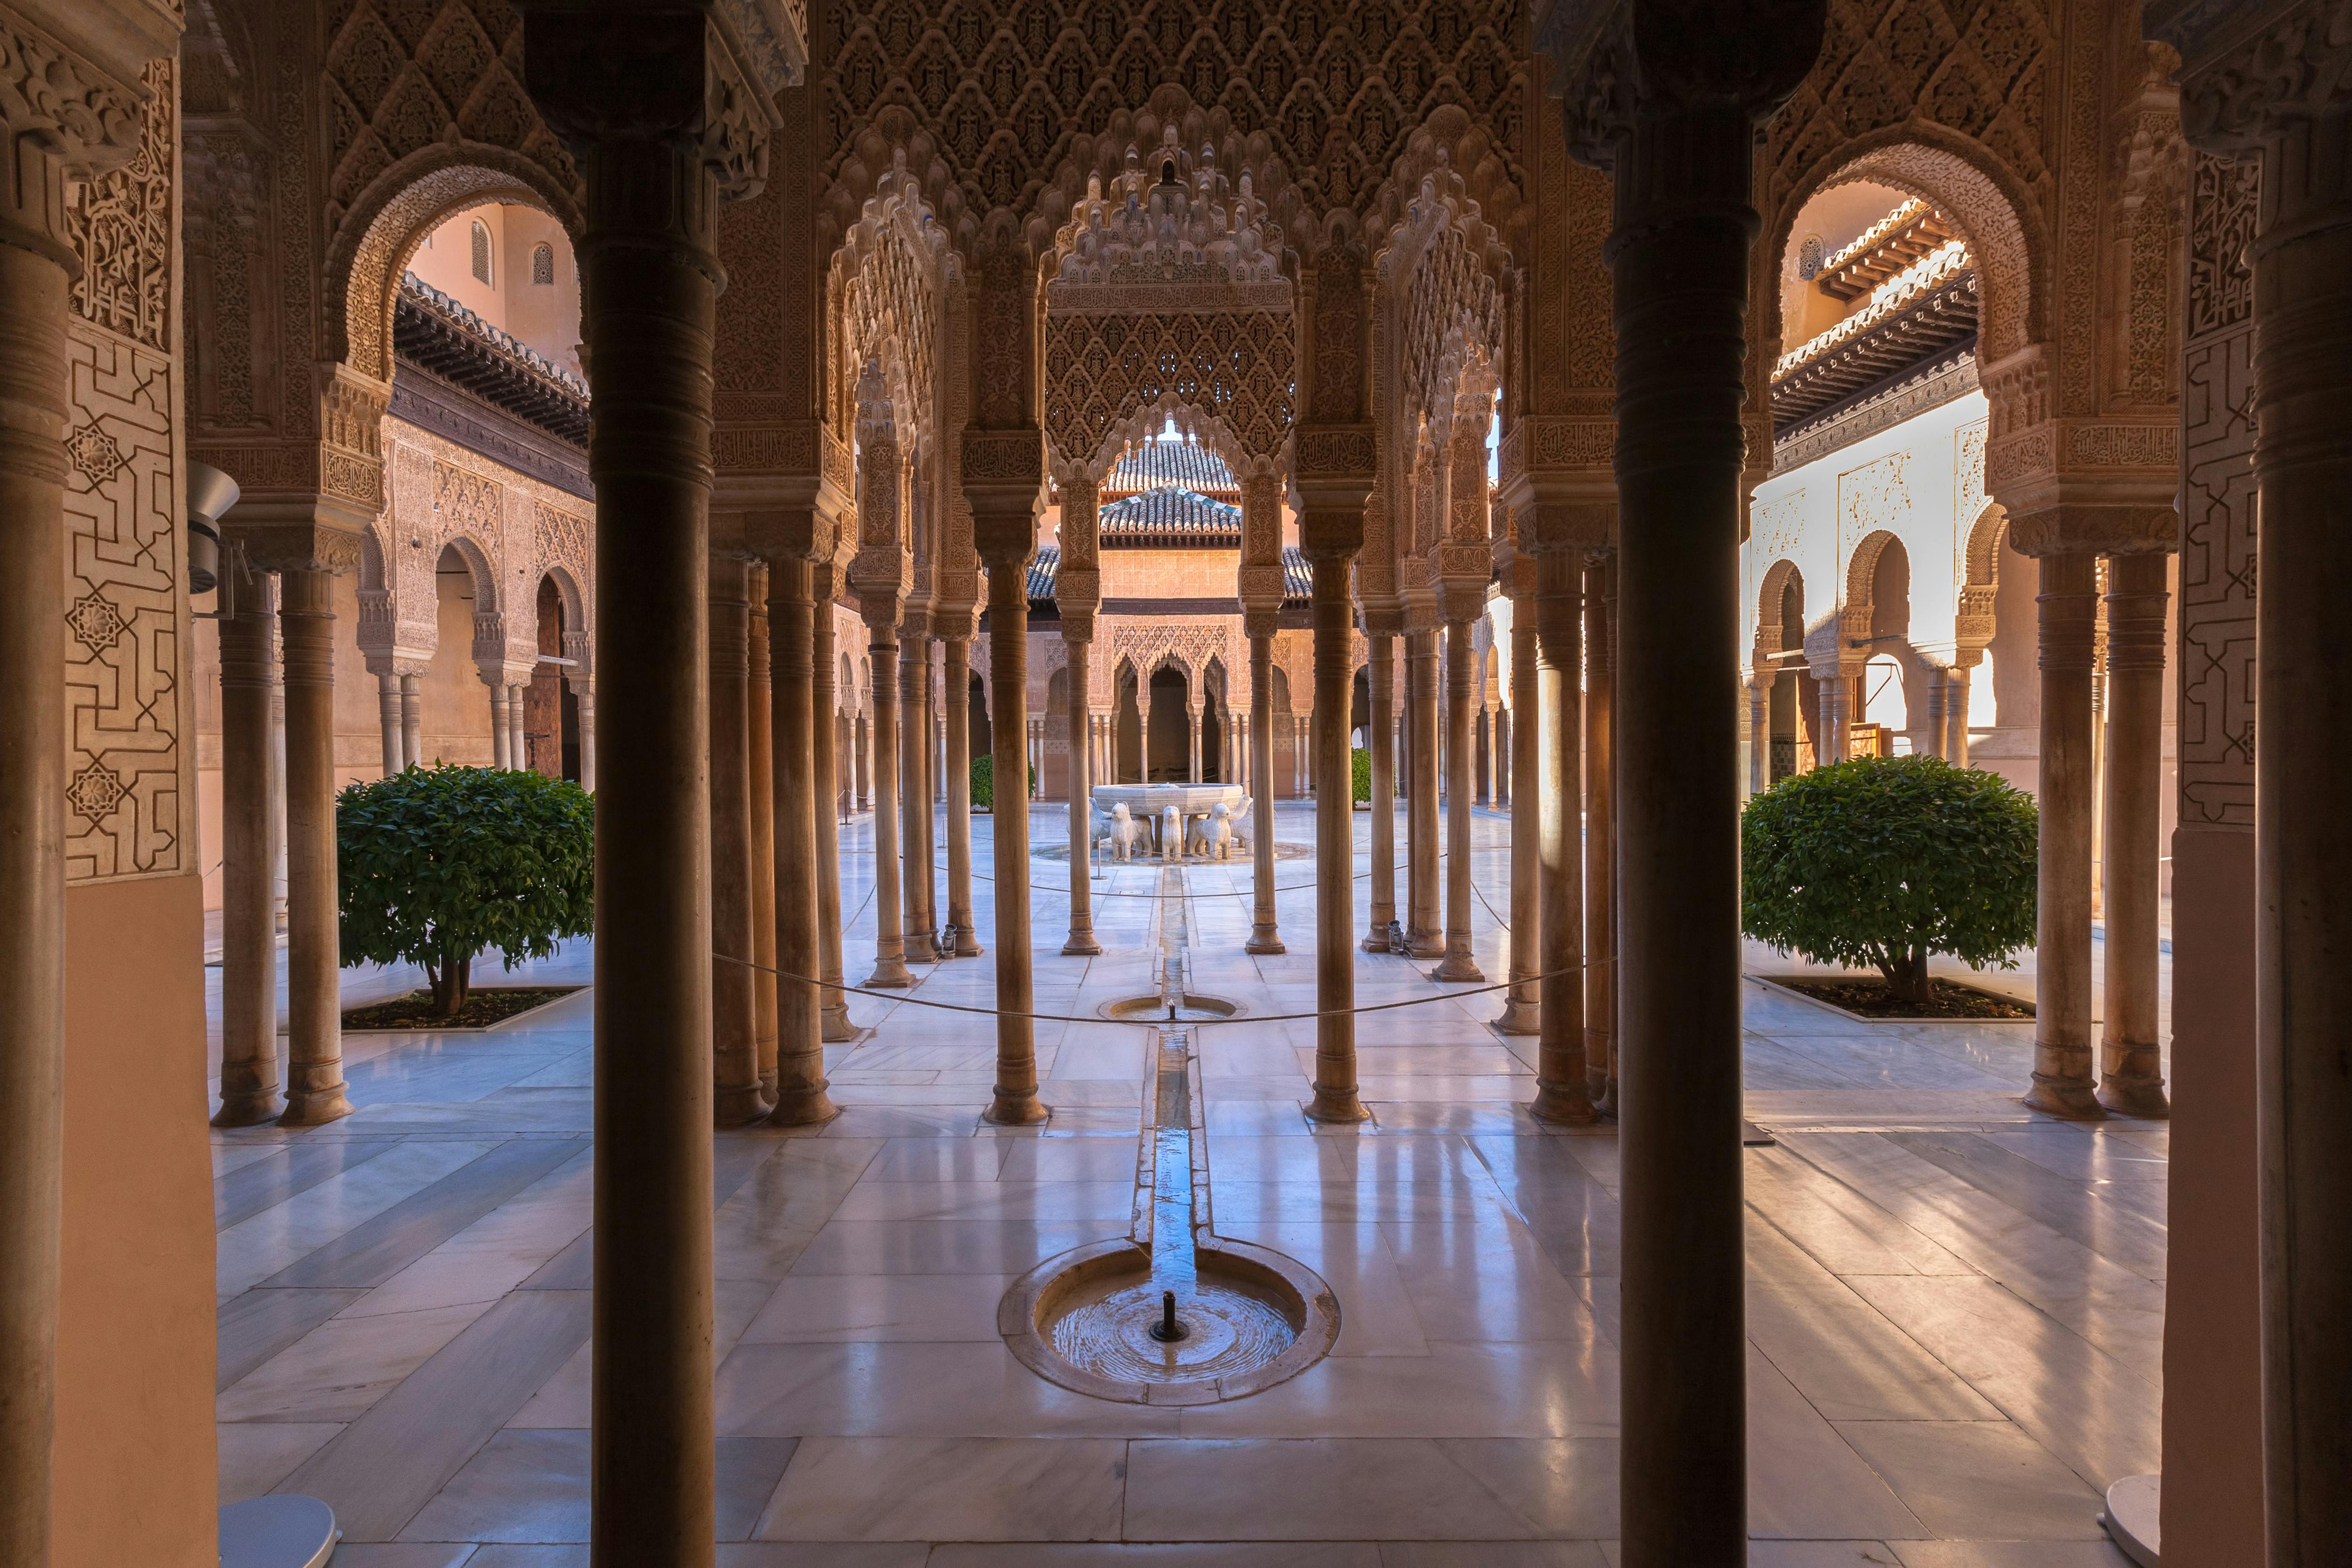 Entrance tickets to the Alhambra with audio guide